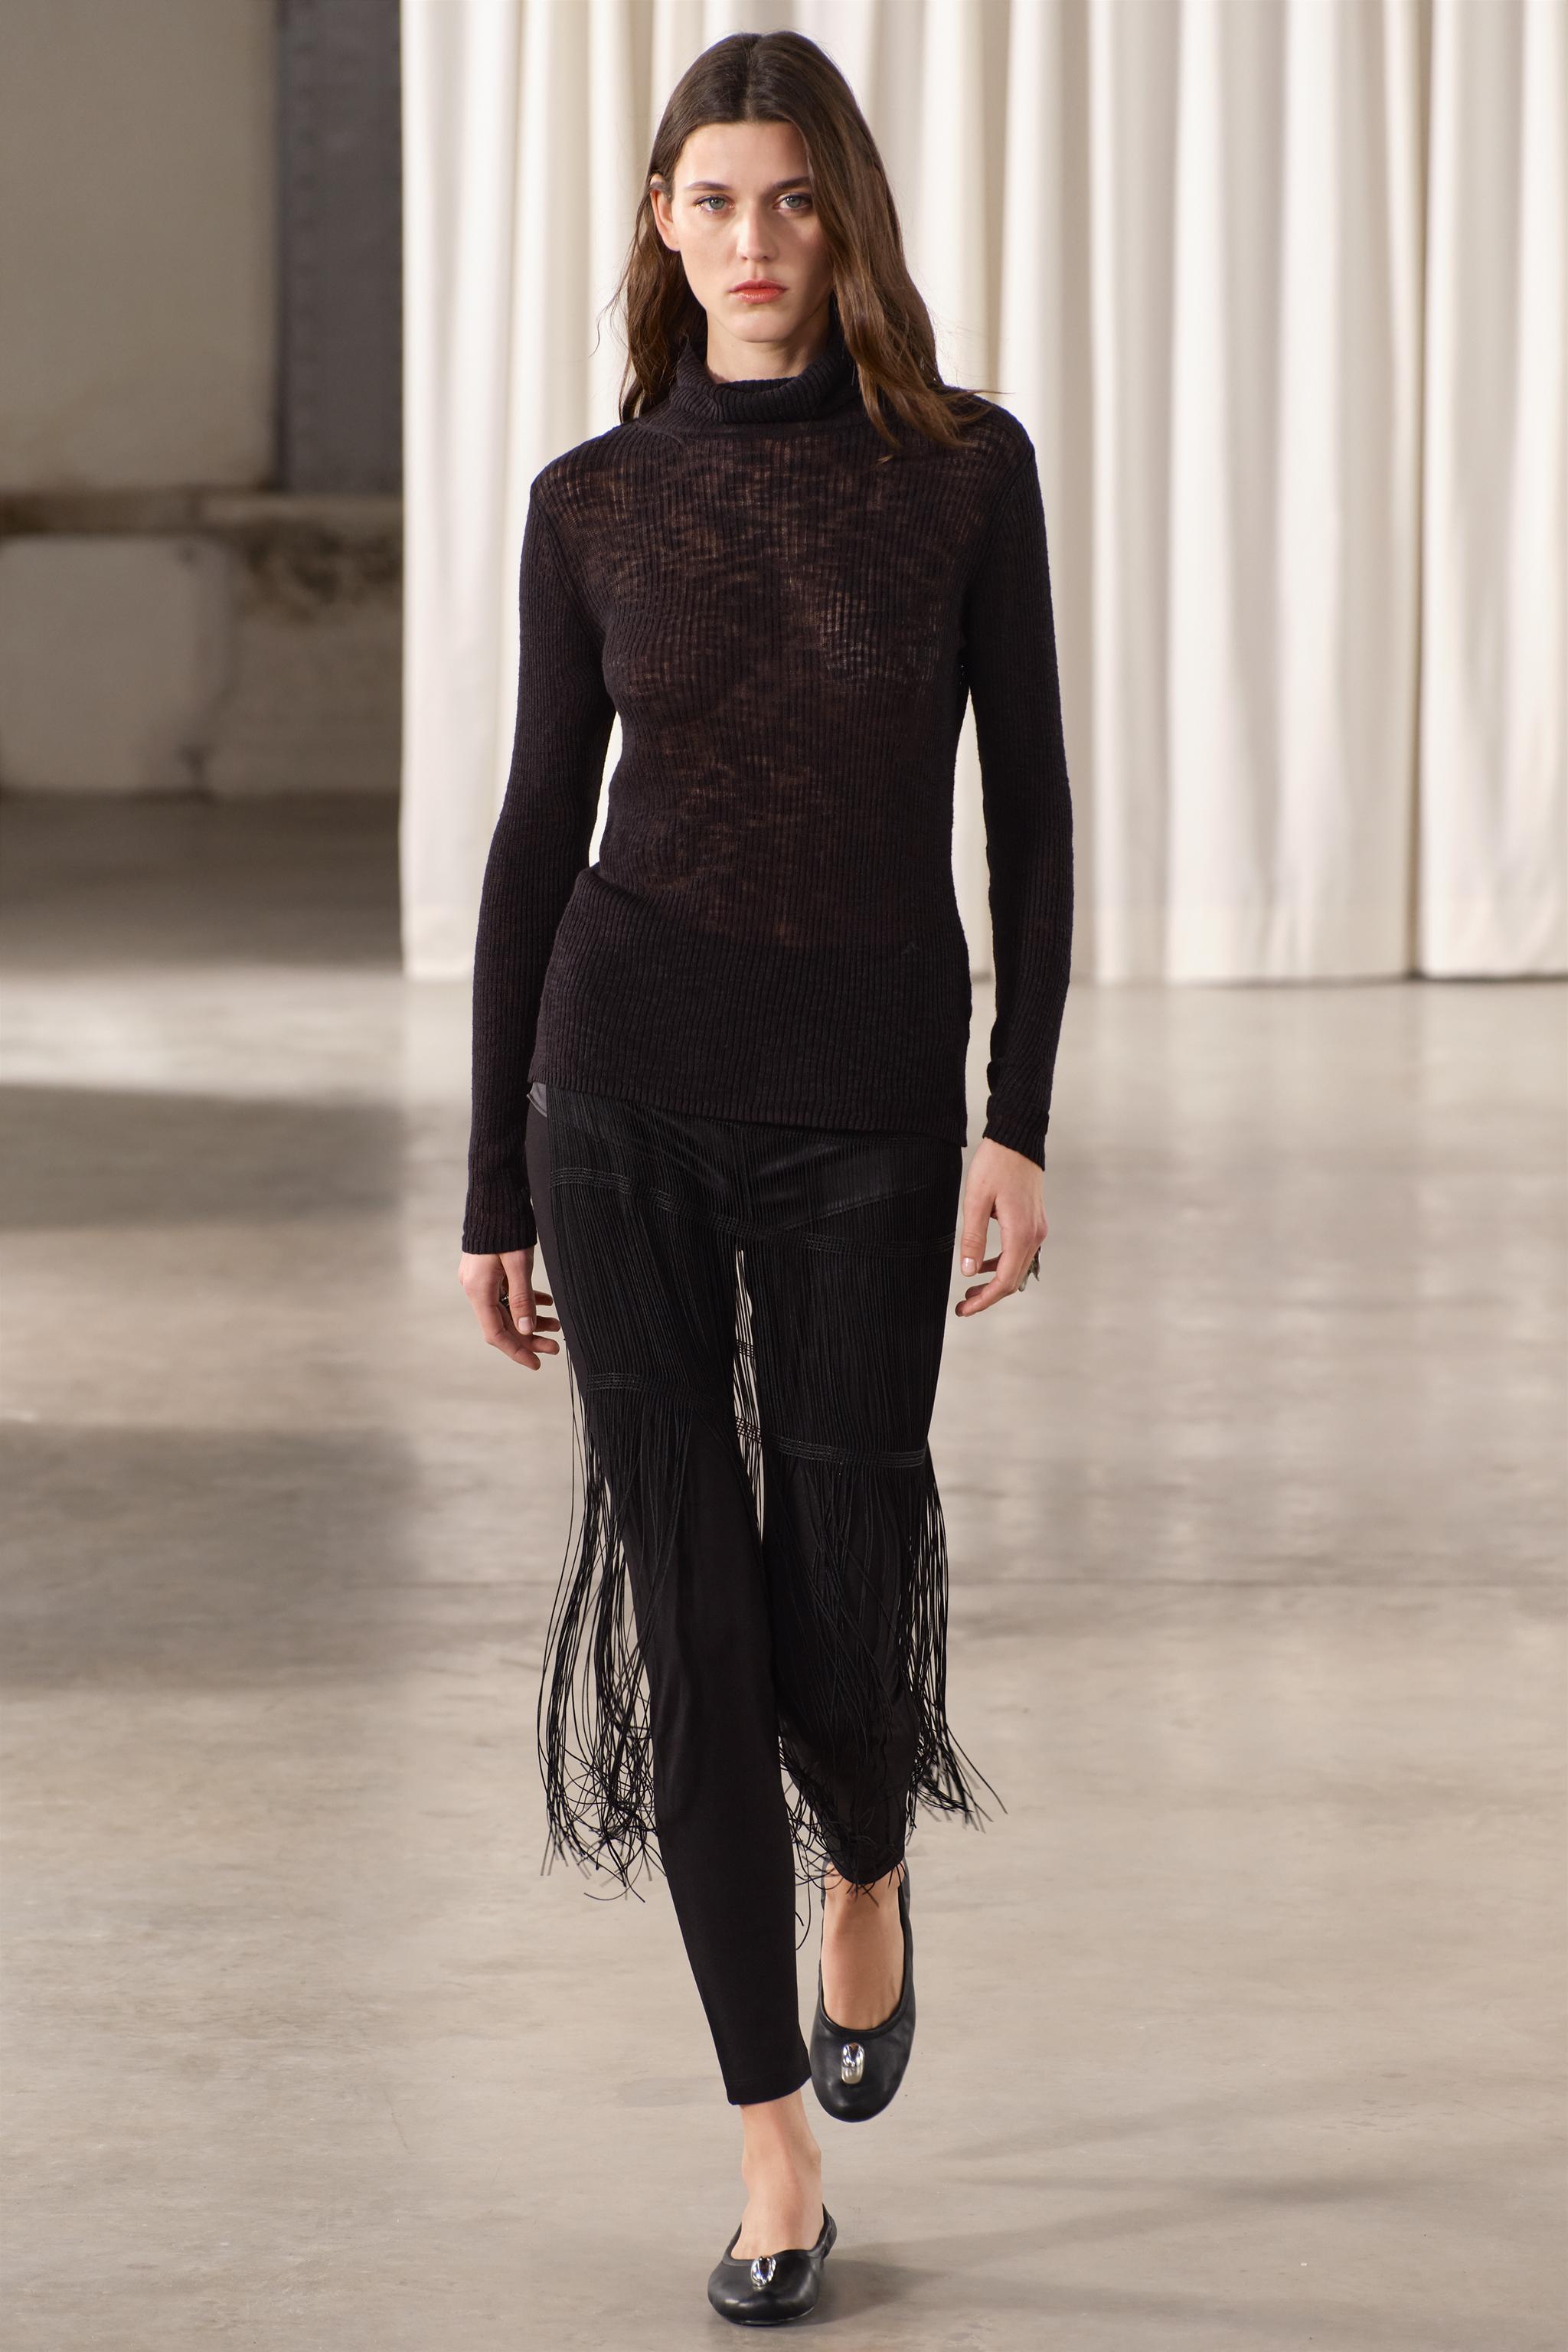 MOCK NECK WOOL AND SILK BLEND KNIT TOP - Black